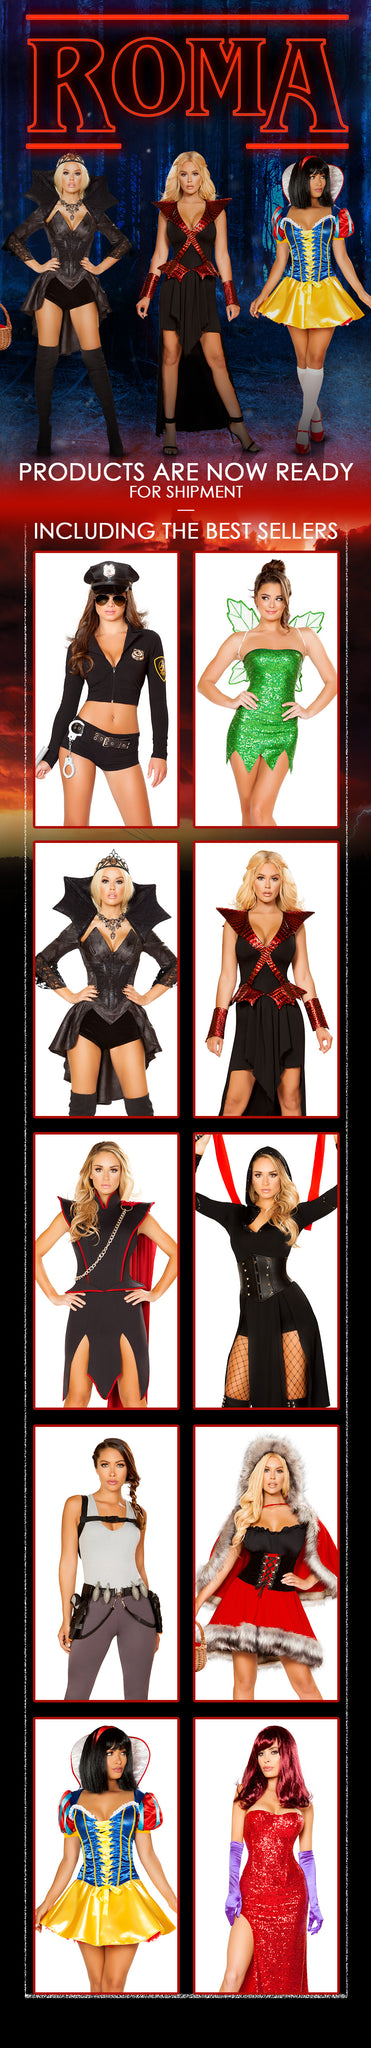 Roma's 2018 Halloween Costume Collection